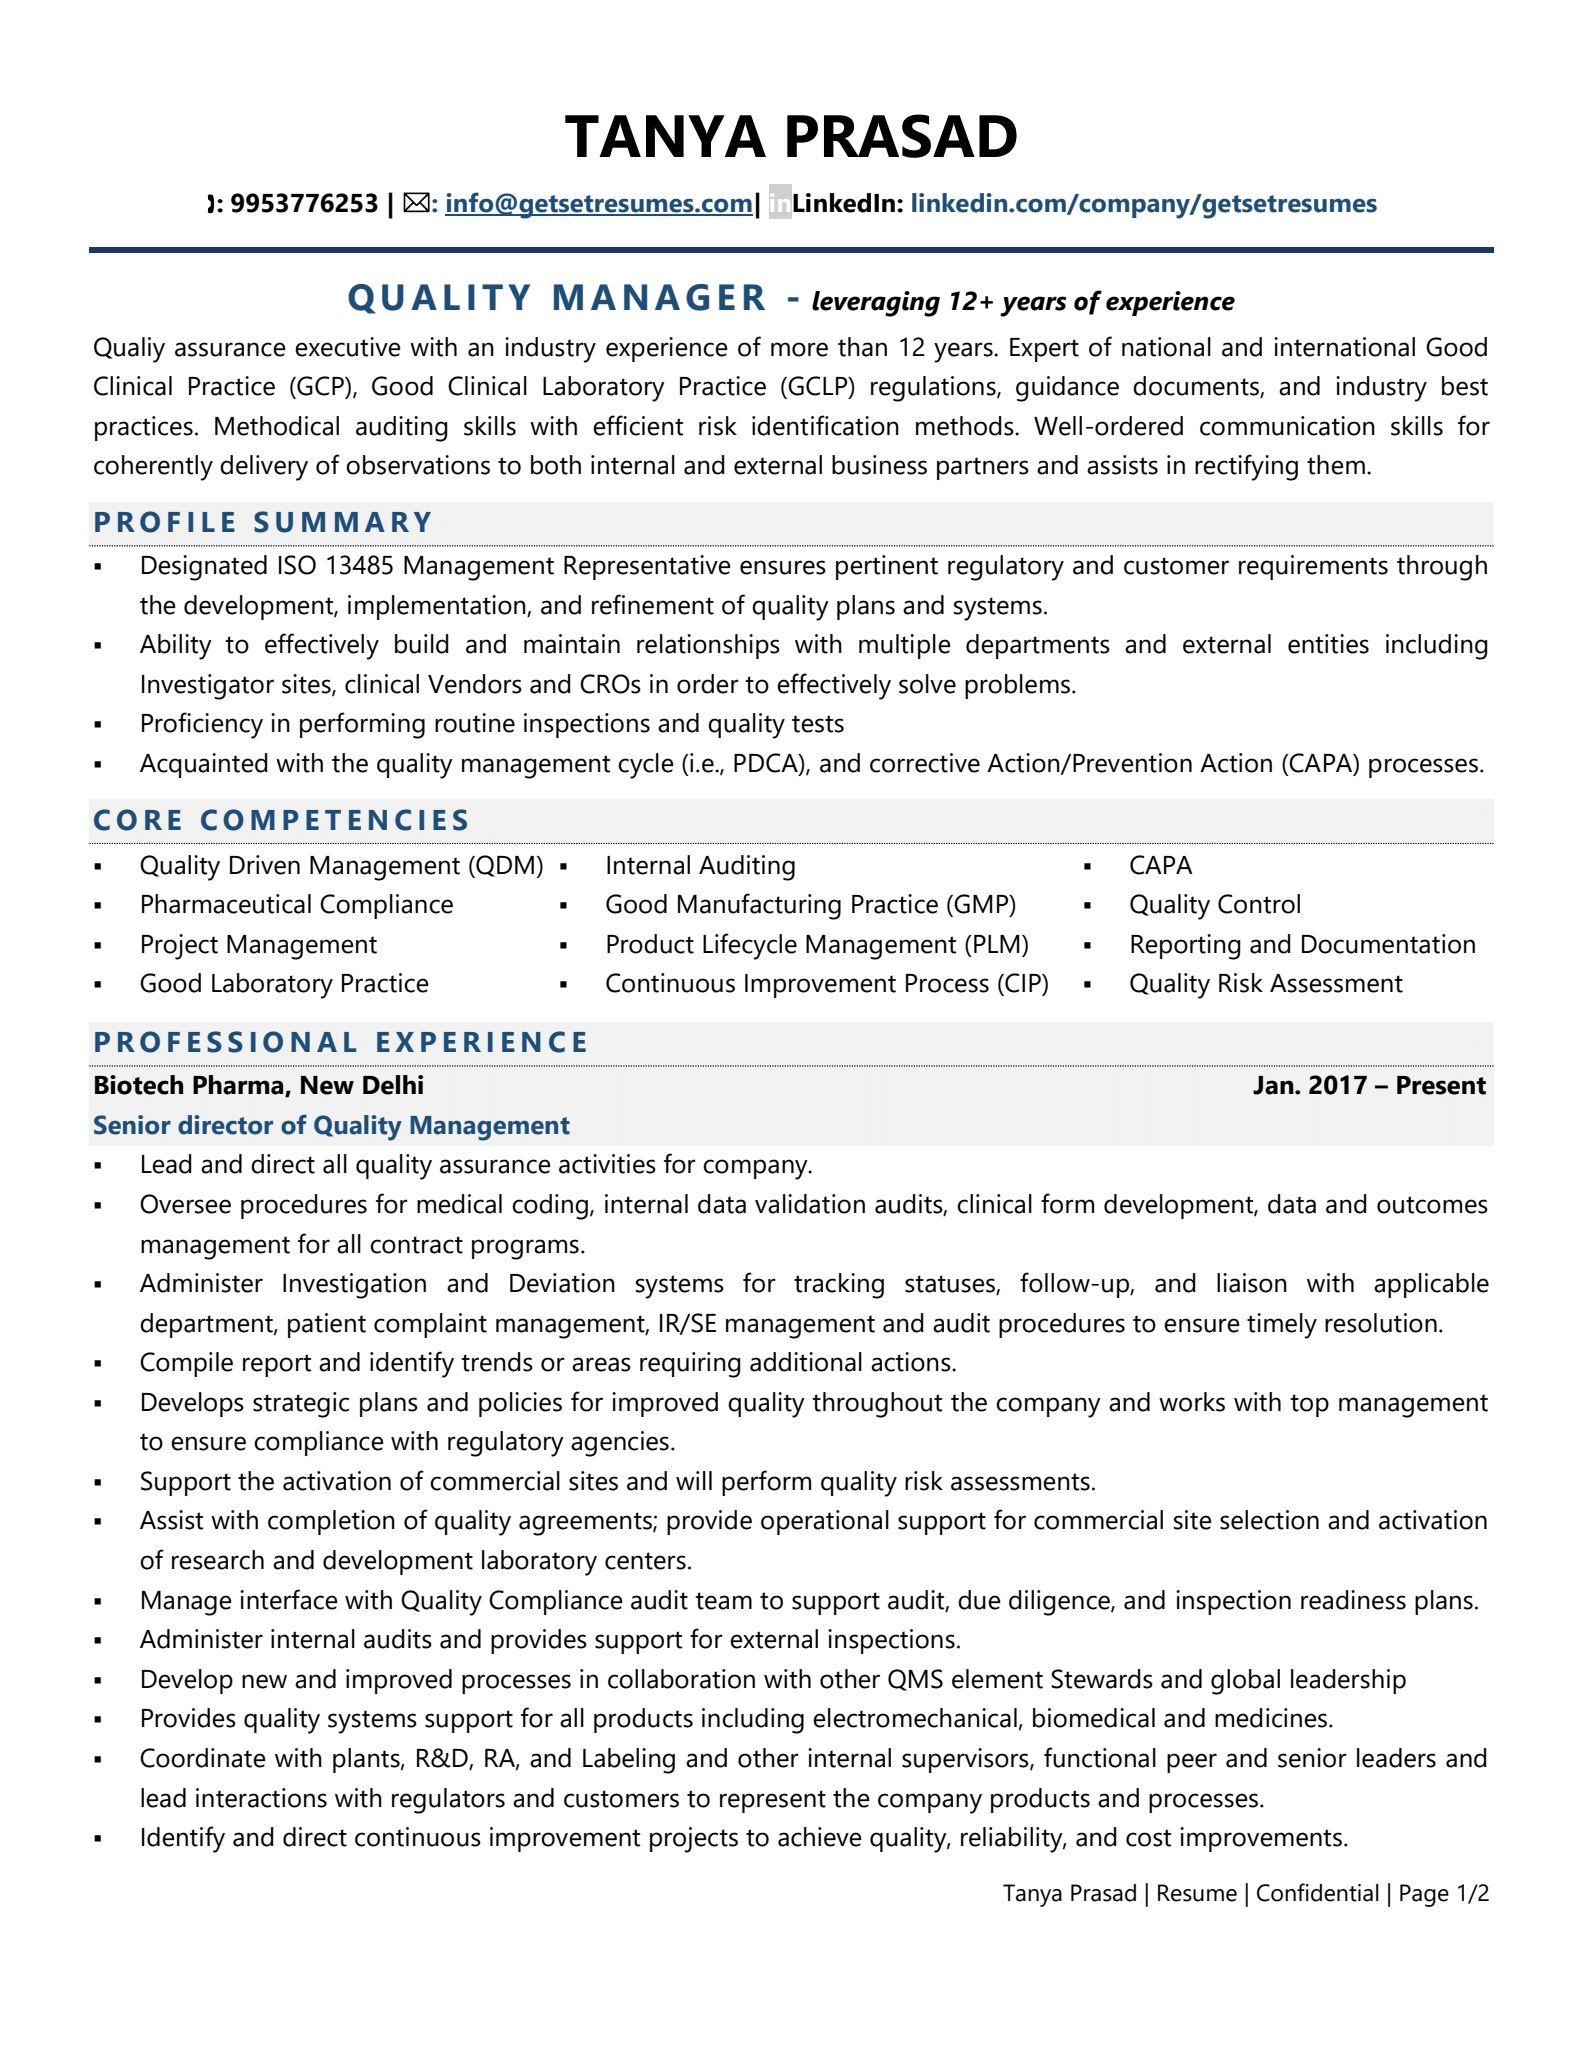 Quality Manager (Pharma) - Resume Example & Template